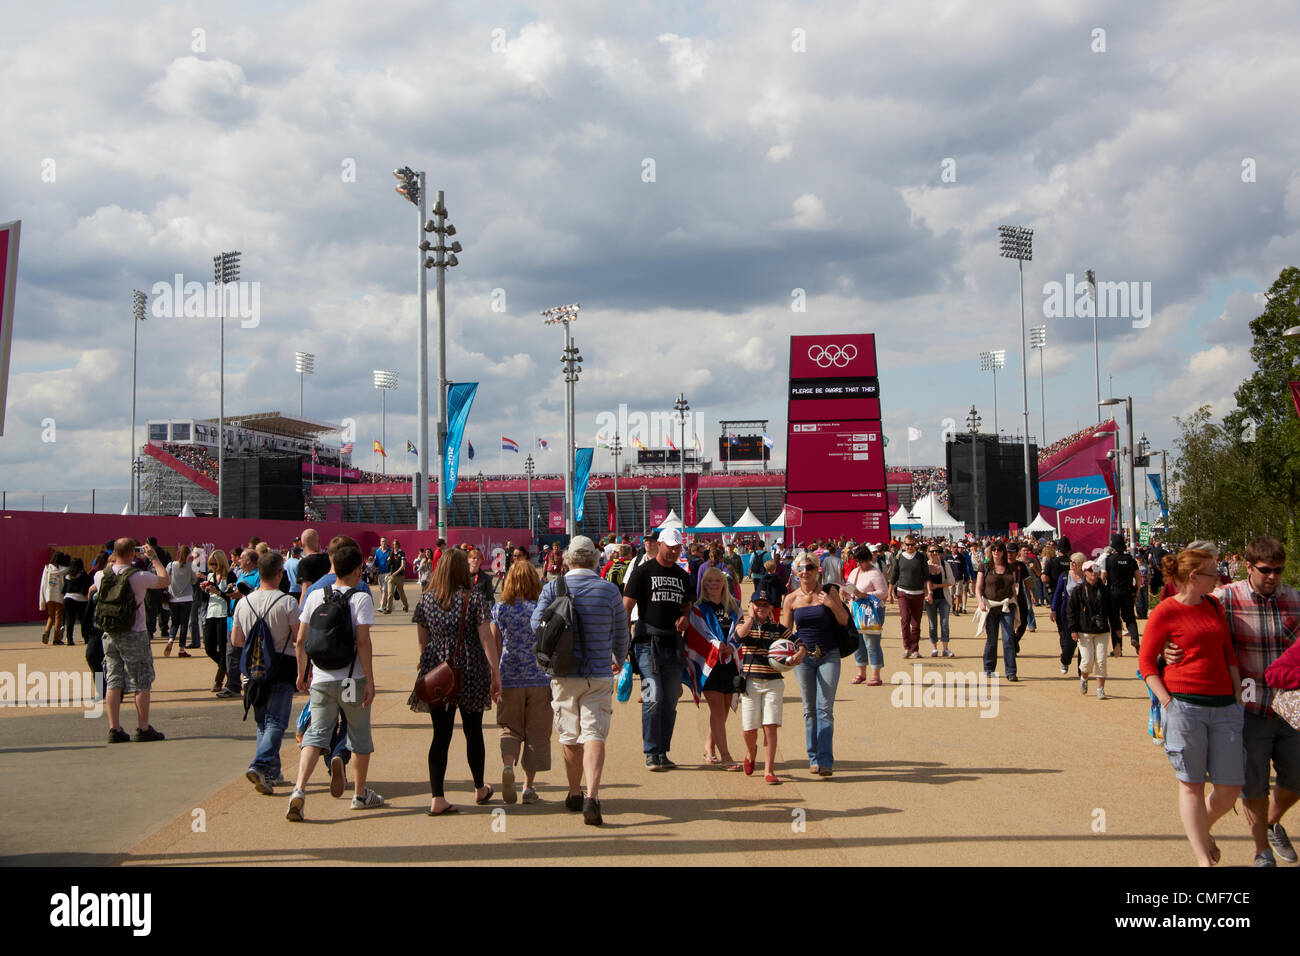 People walking to Riverbank Arena at Olympic Park, London 2012 Olympic Games site, Stratford London E20 UK, Stock Photo